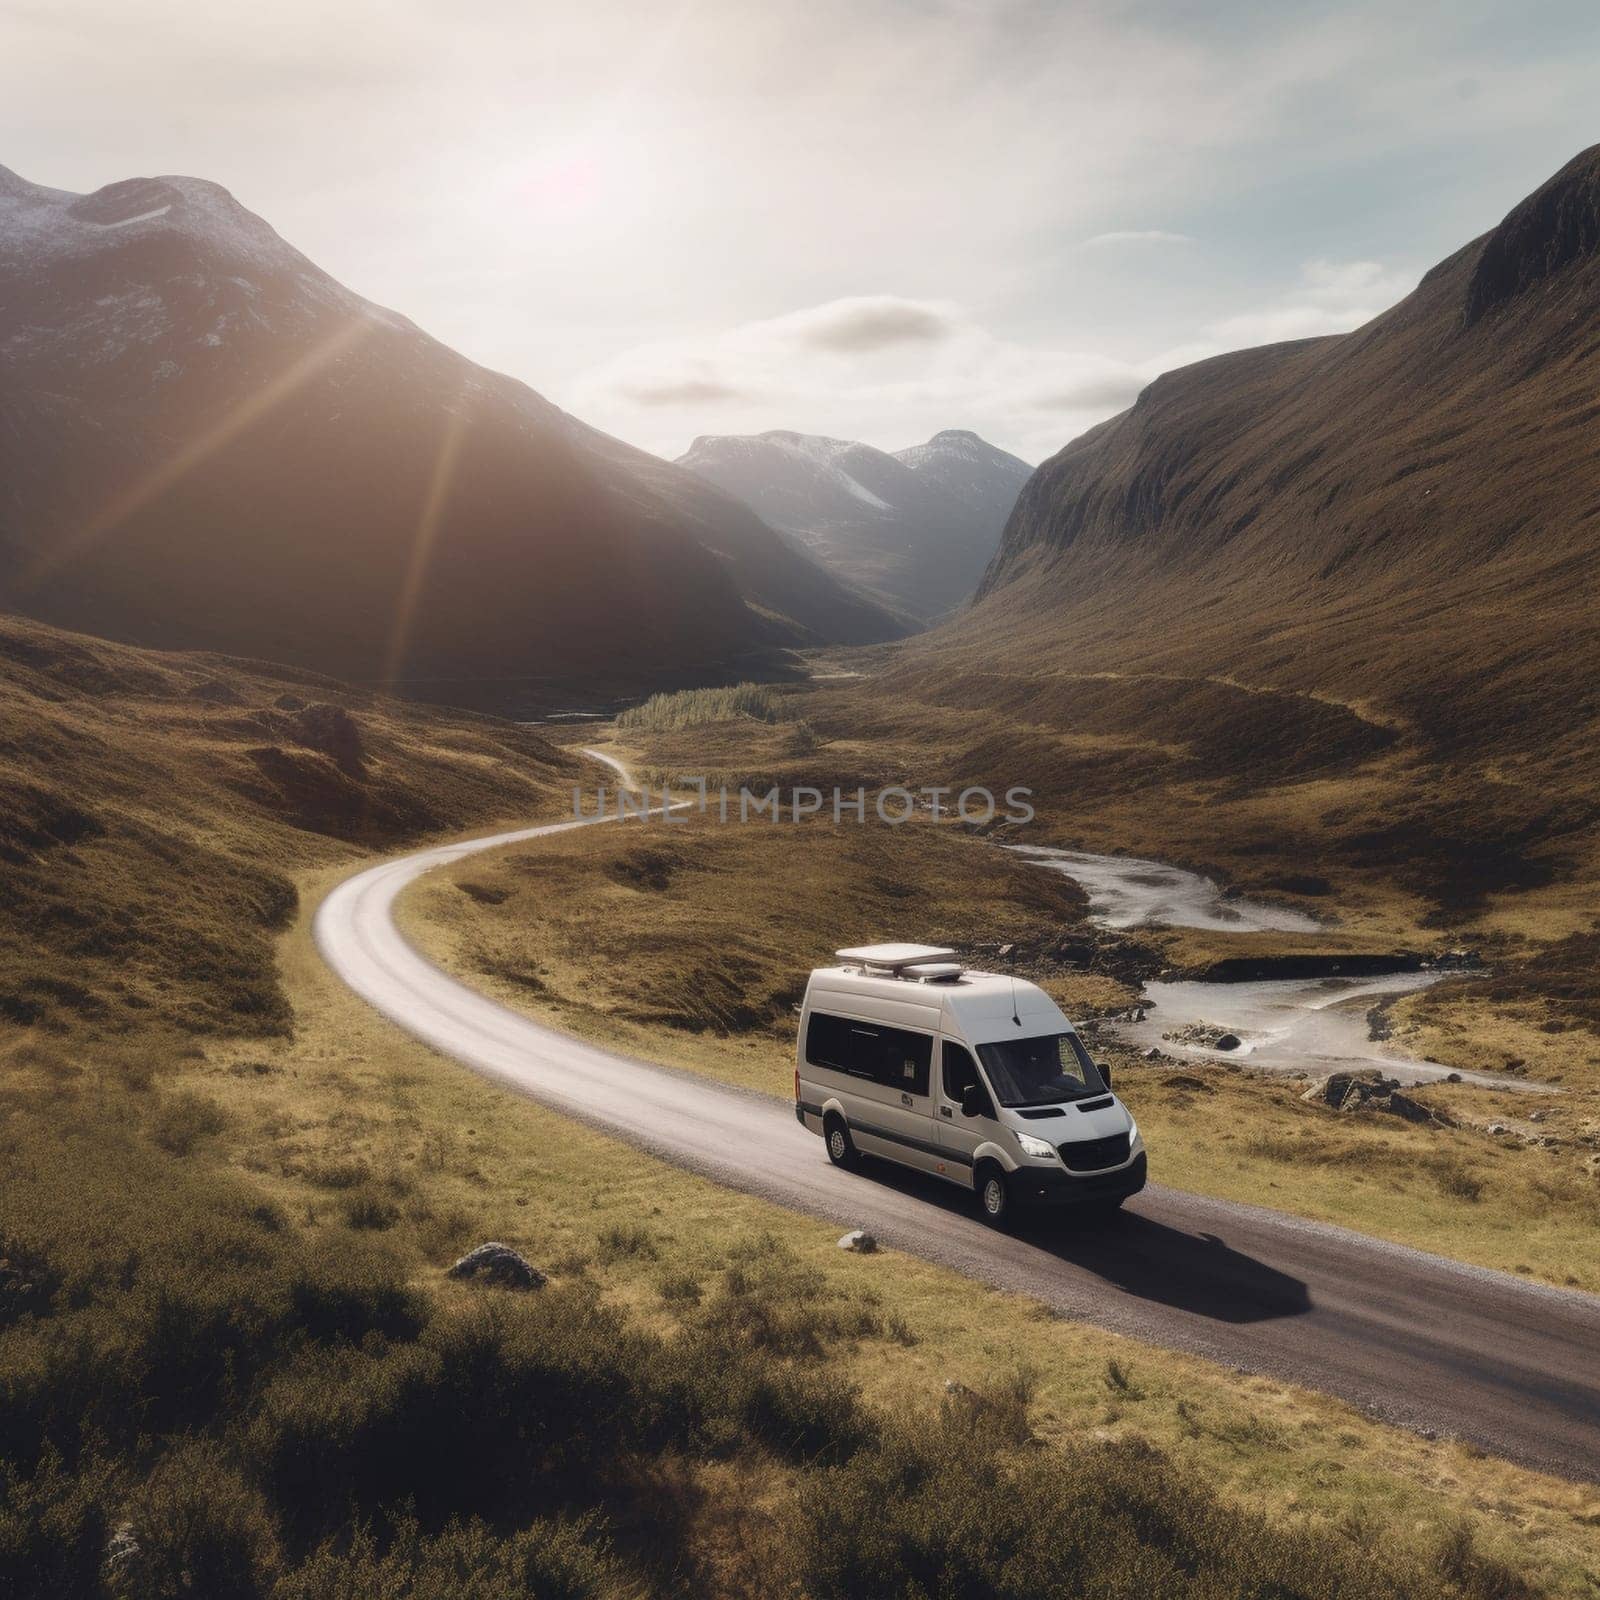 Sleek and Modern Camper Van Parked on a Quiet Country Road with Mountain View by Sahin